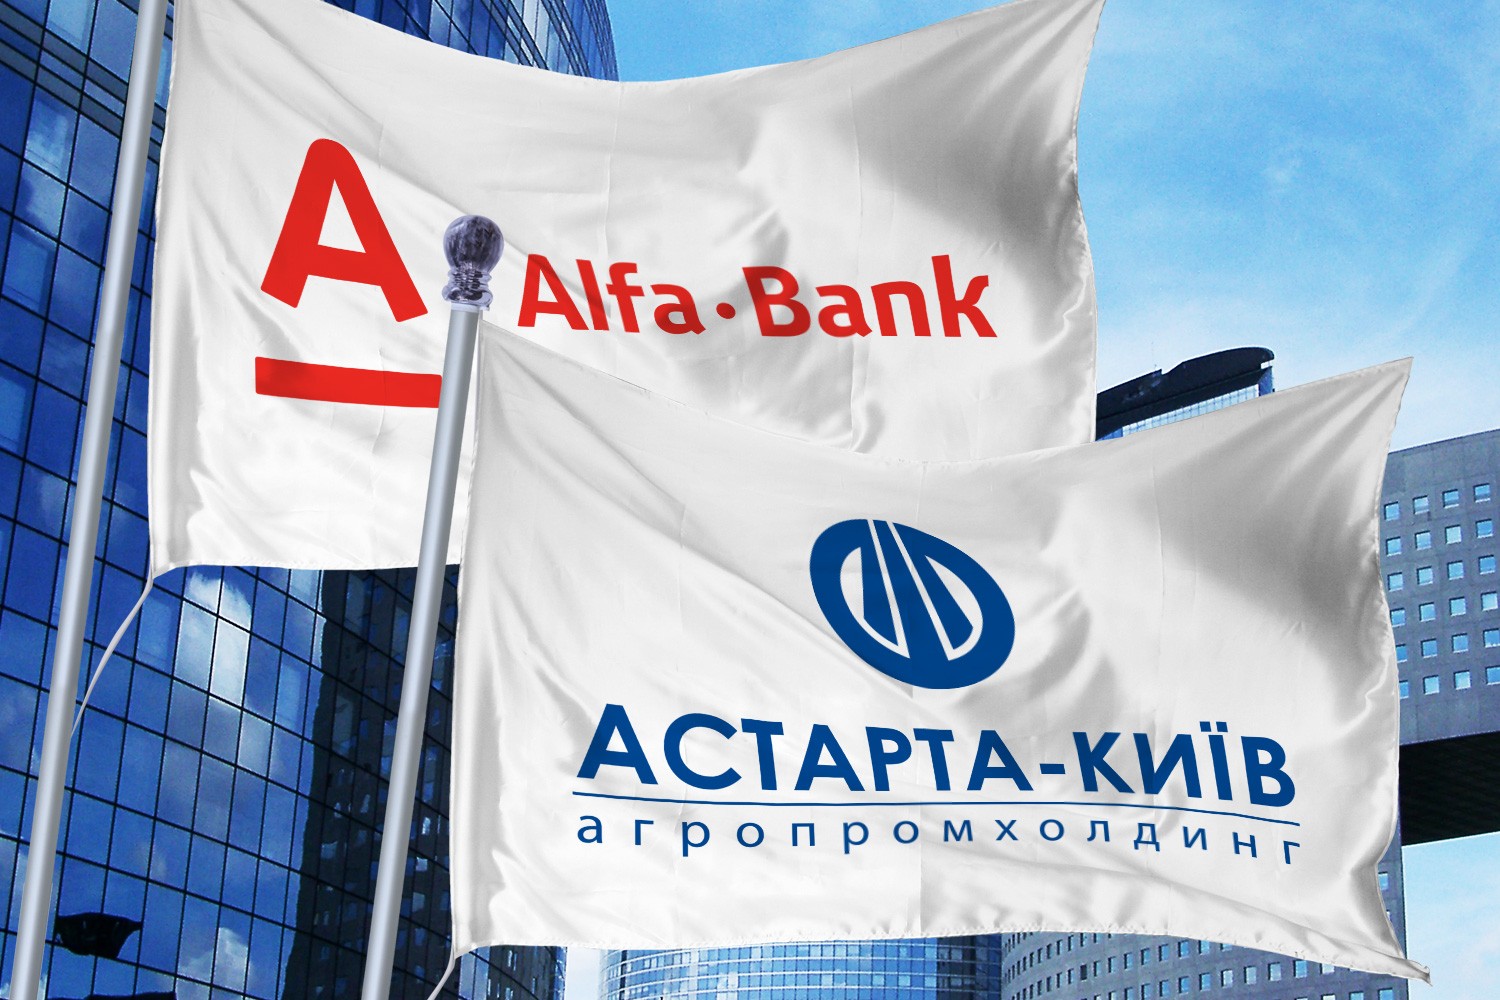 Astarta (Ivanchik family) and Alfa-Bank Ukraine have opened a partnership program for agricultural producers